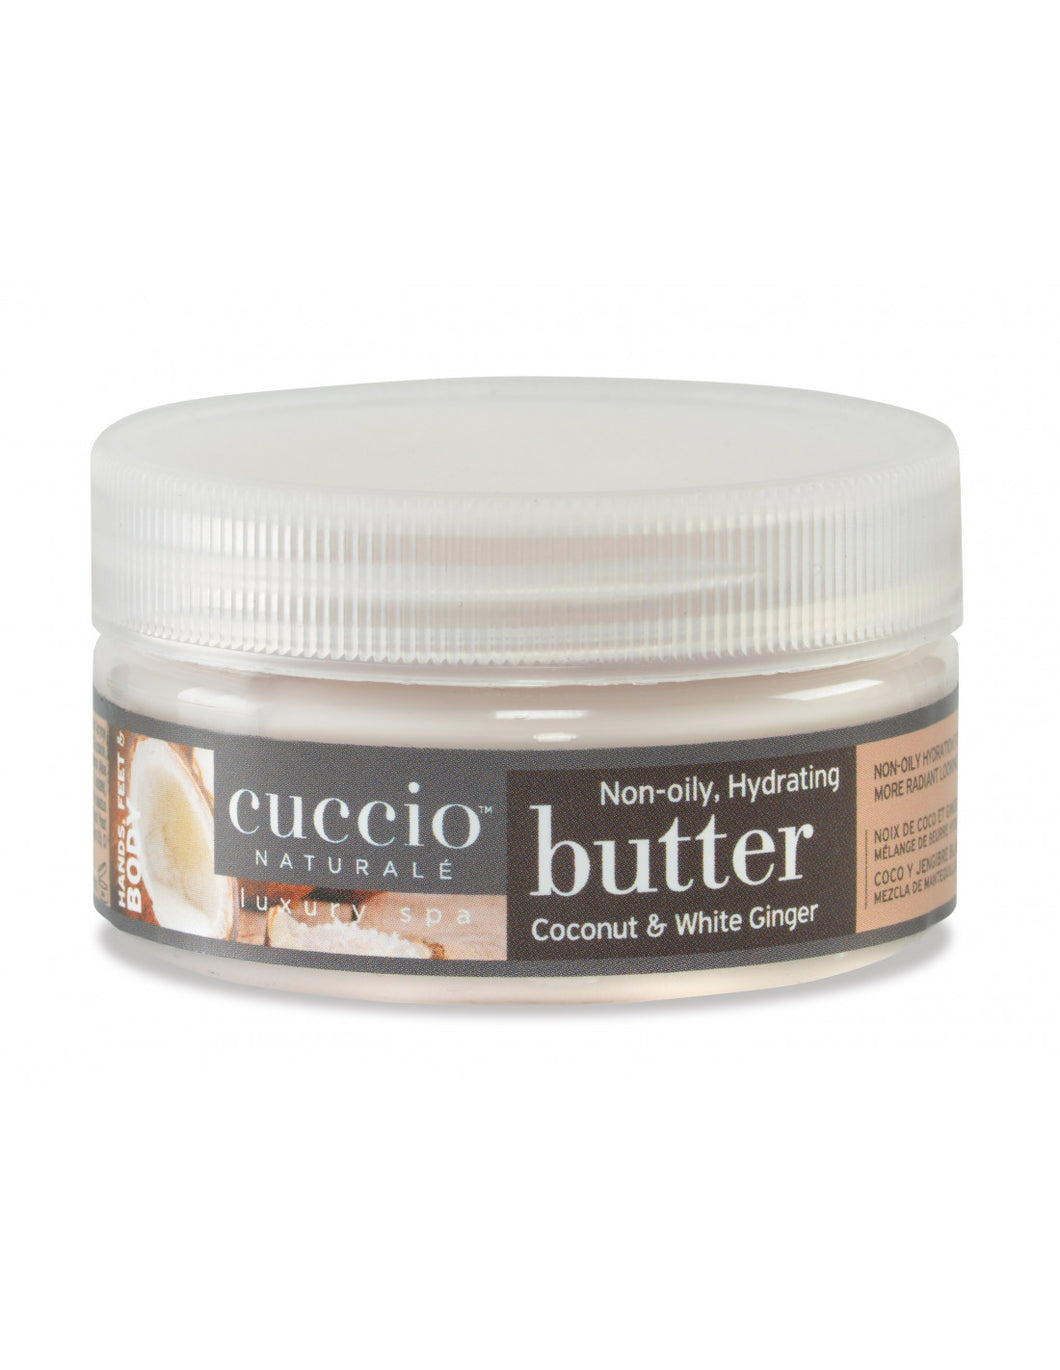 CUCCIO NATURALÉ HYDRATING BUTTER - COCONUT & WHITE GINGER ΒΑΒΥ ΒUΤΤΕR 42gr